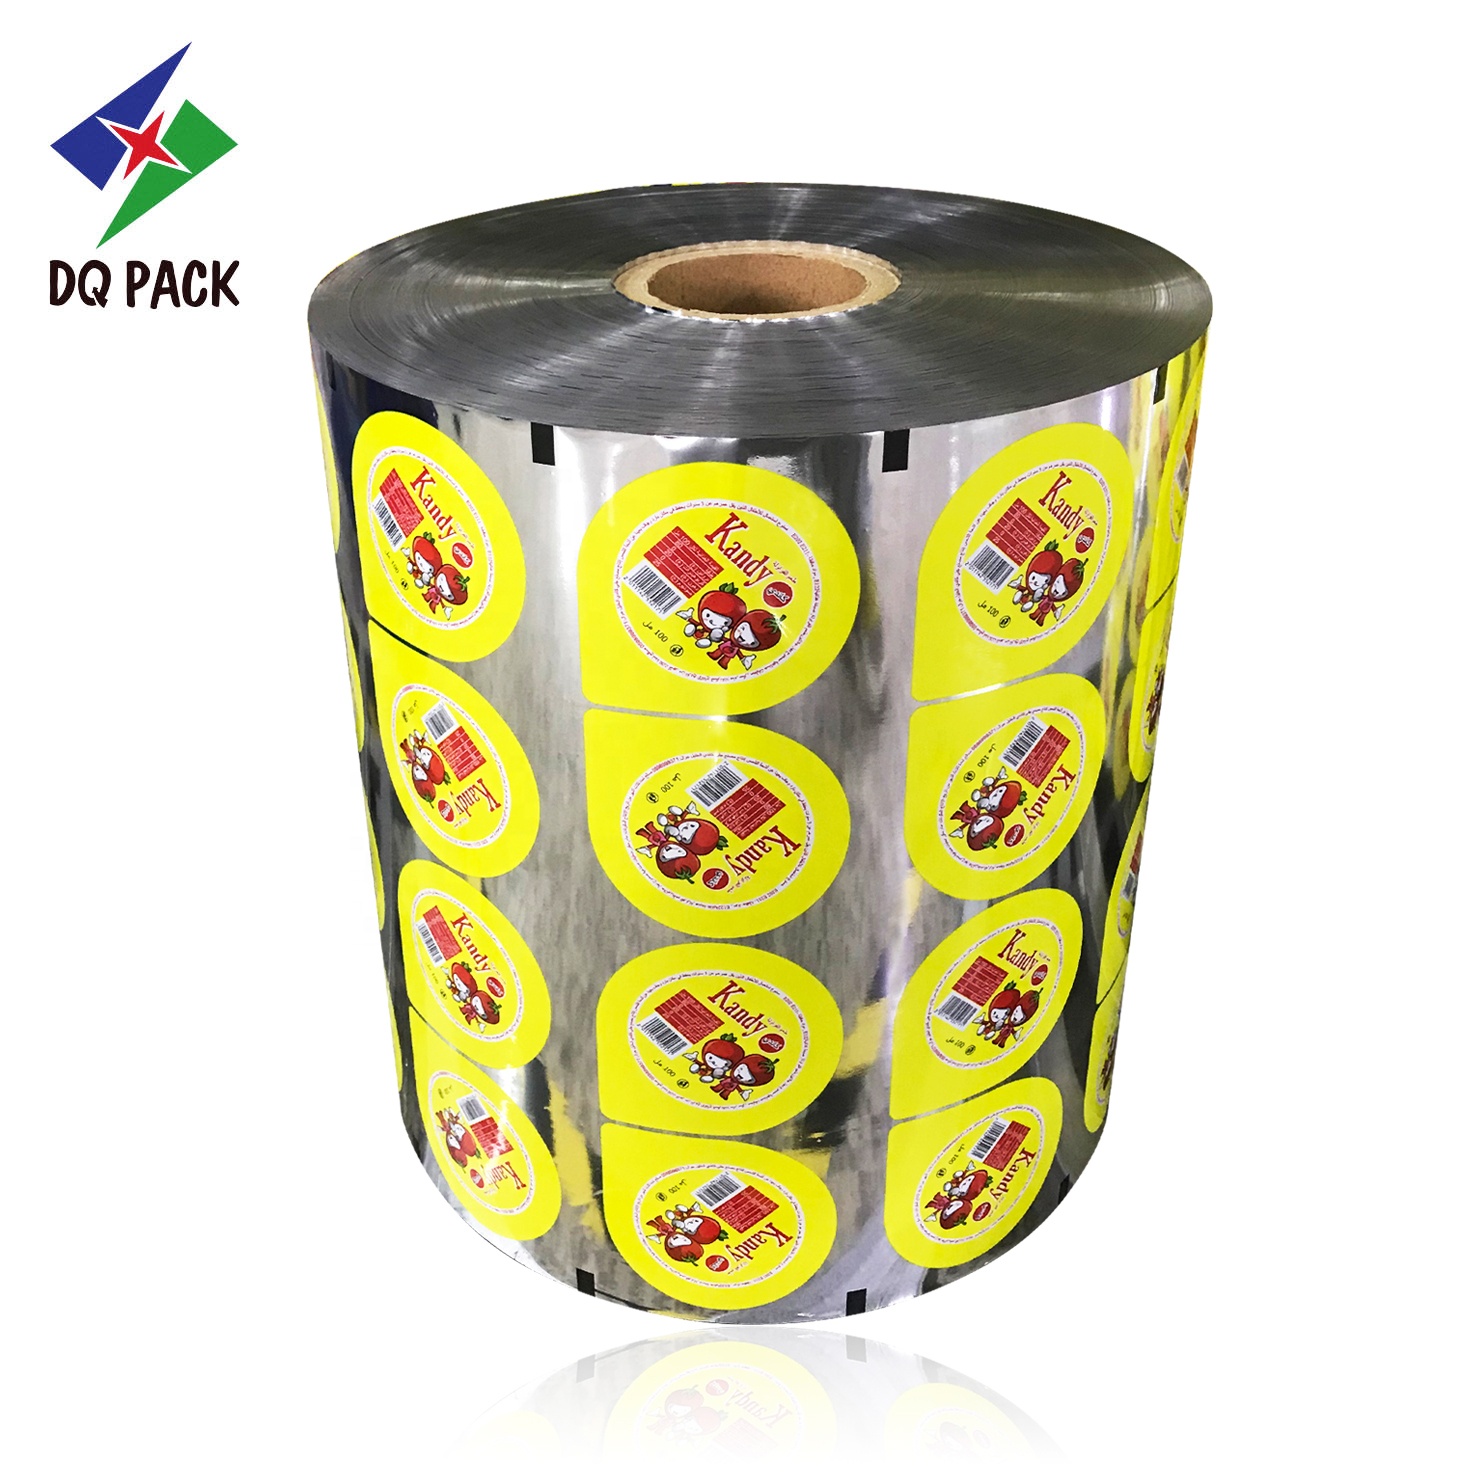 DQ PACK OEM Design Easy Peel Off Pudding Cup Lid Foil Roll Film Fruit Jelly Bubble Mike Tea Cup Seal Roll Film